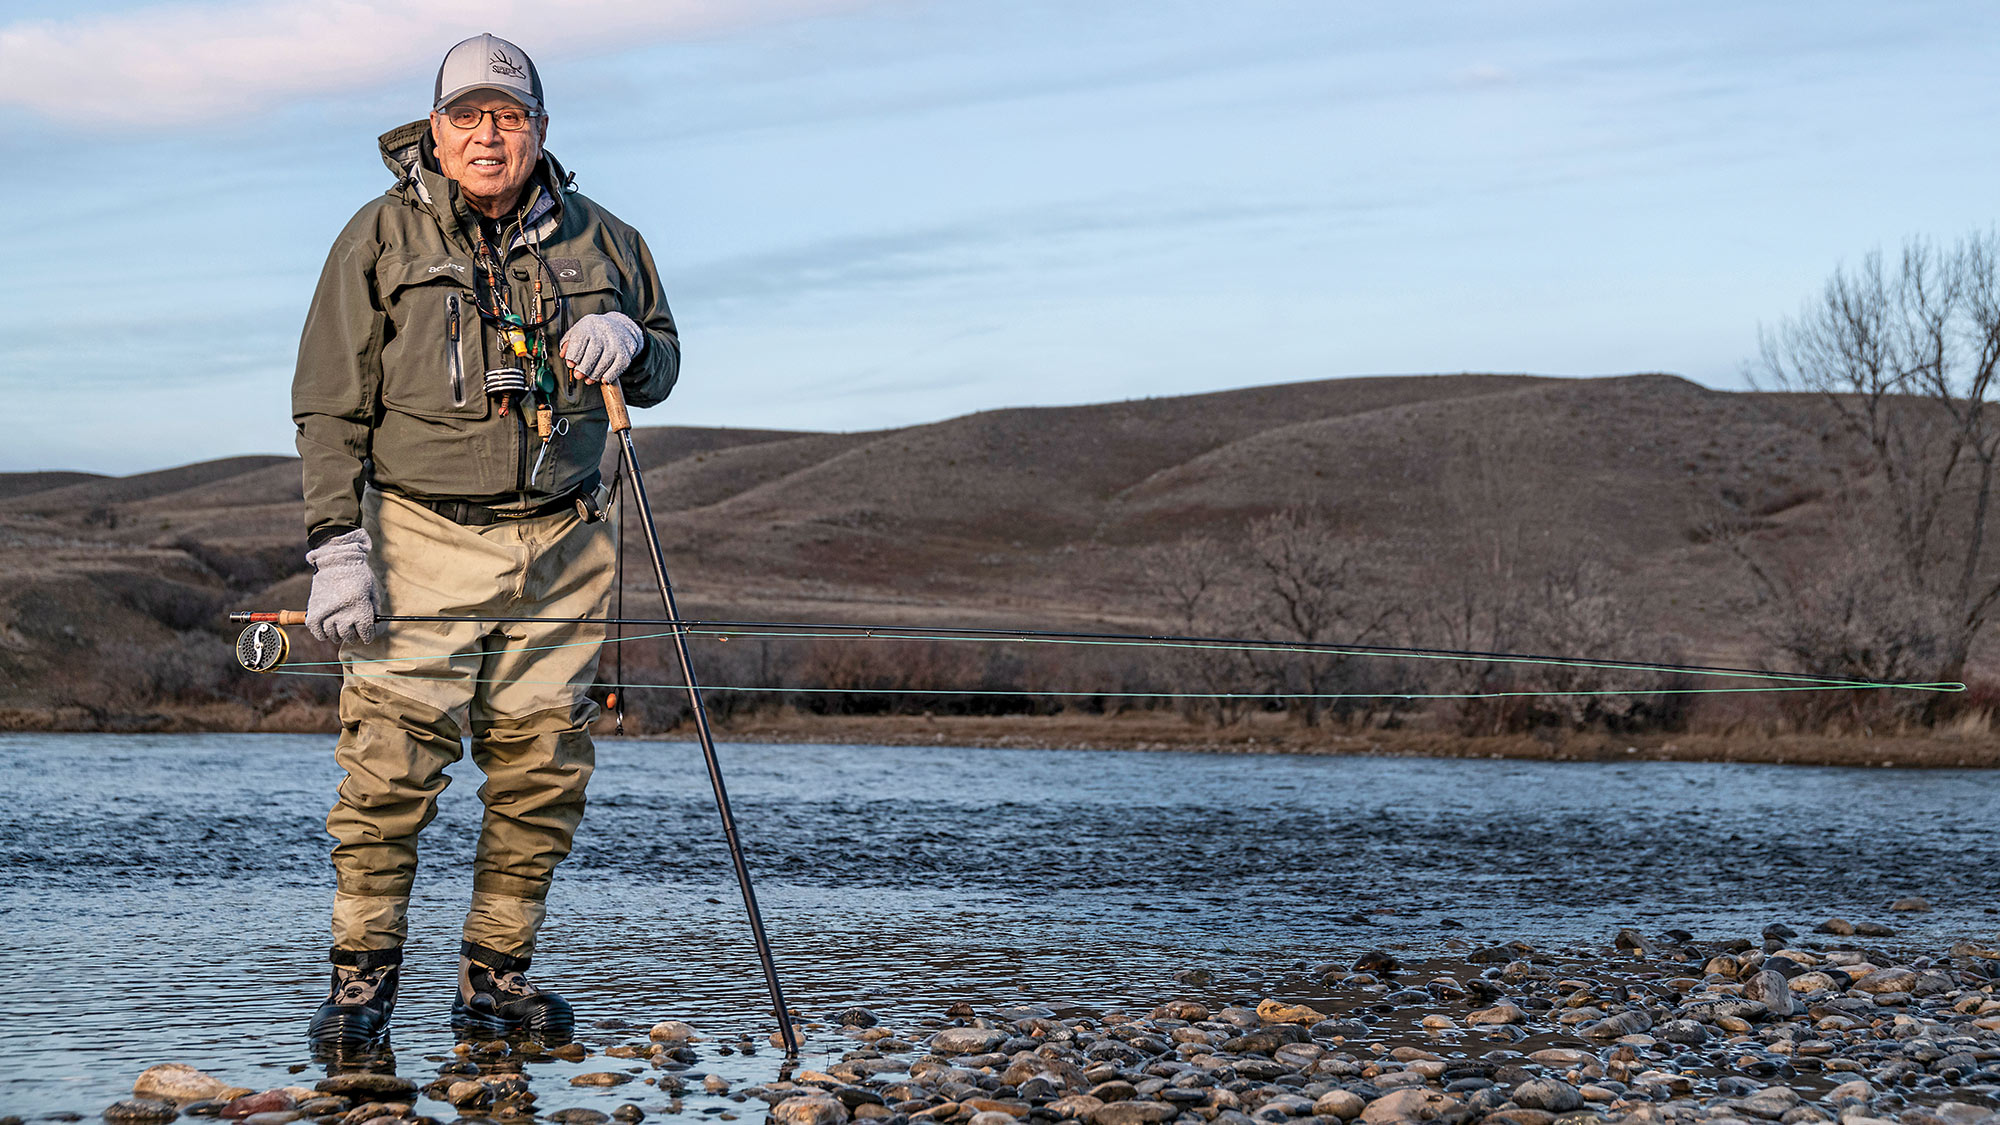 fly fisherman wearing waders and holding rod and walking stick poses at shallow, rocky edge of river